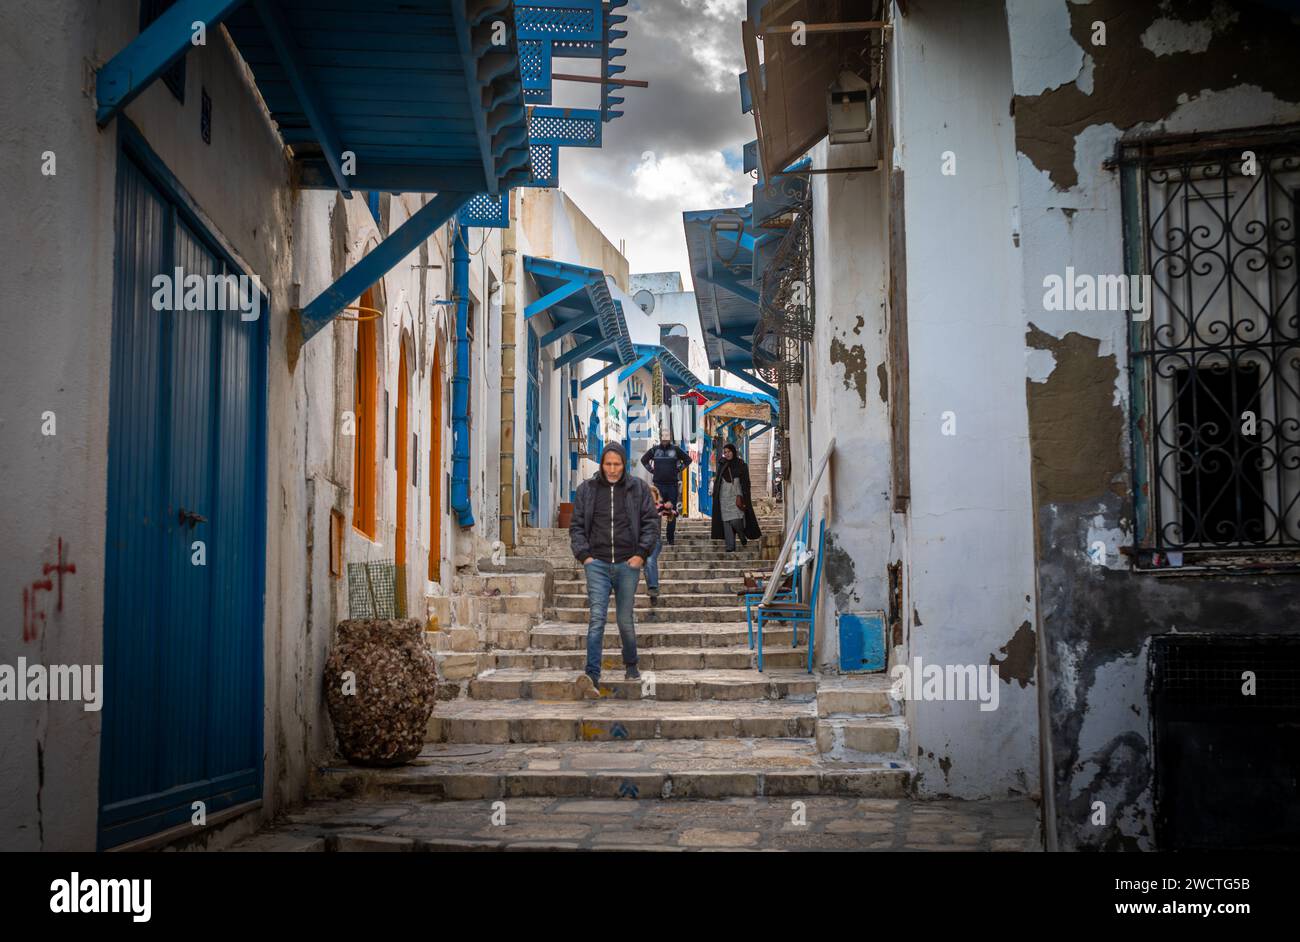 A man walks down steps in the Rue el Aghalba, a small cobbled street in the ancient medina, Sousse, Tunisia. The medina is a UNESCO World Heritage Sit Stock Photo